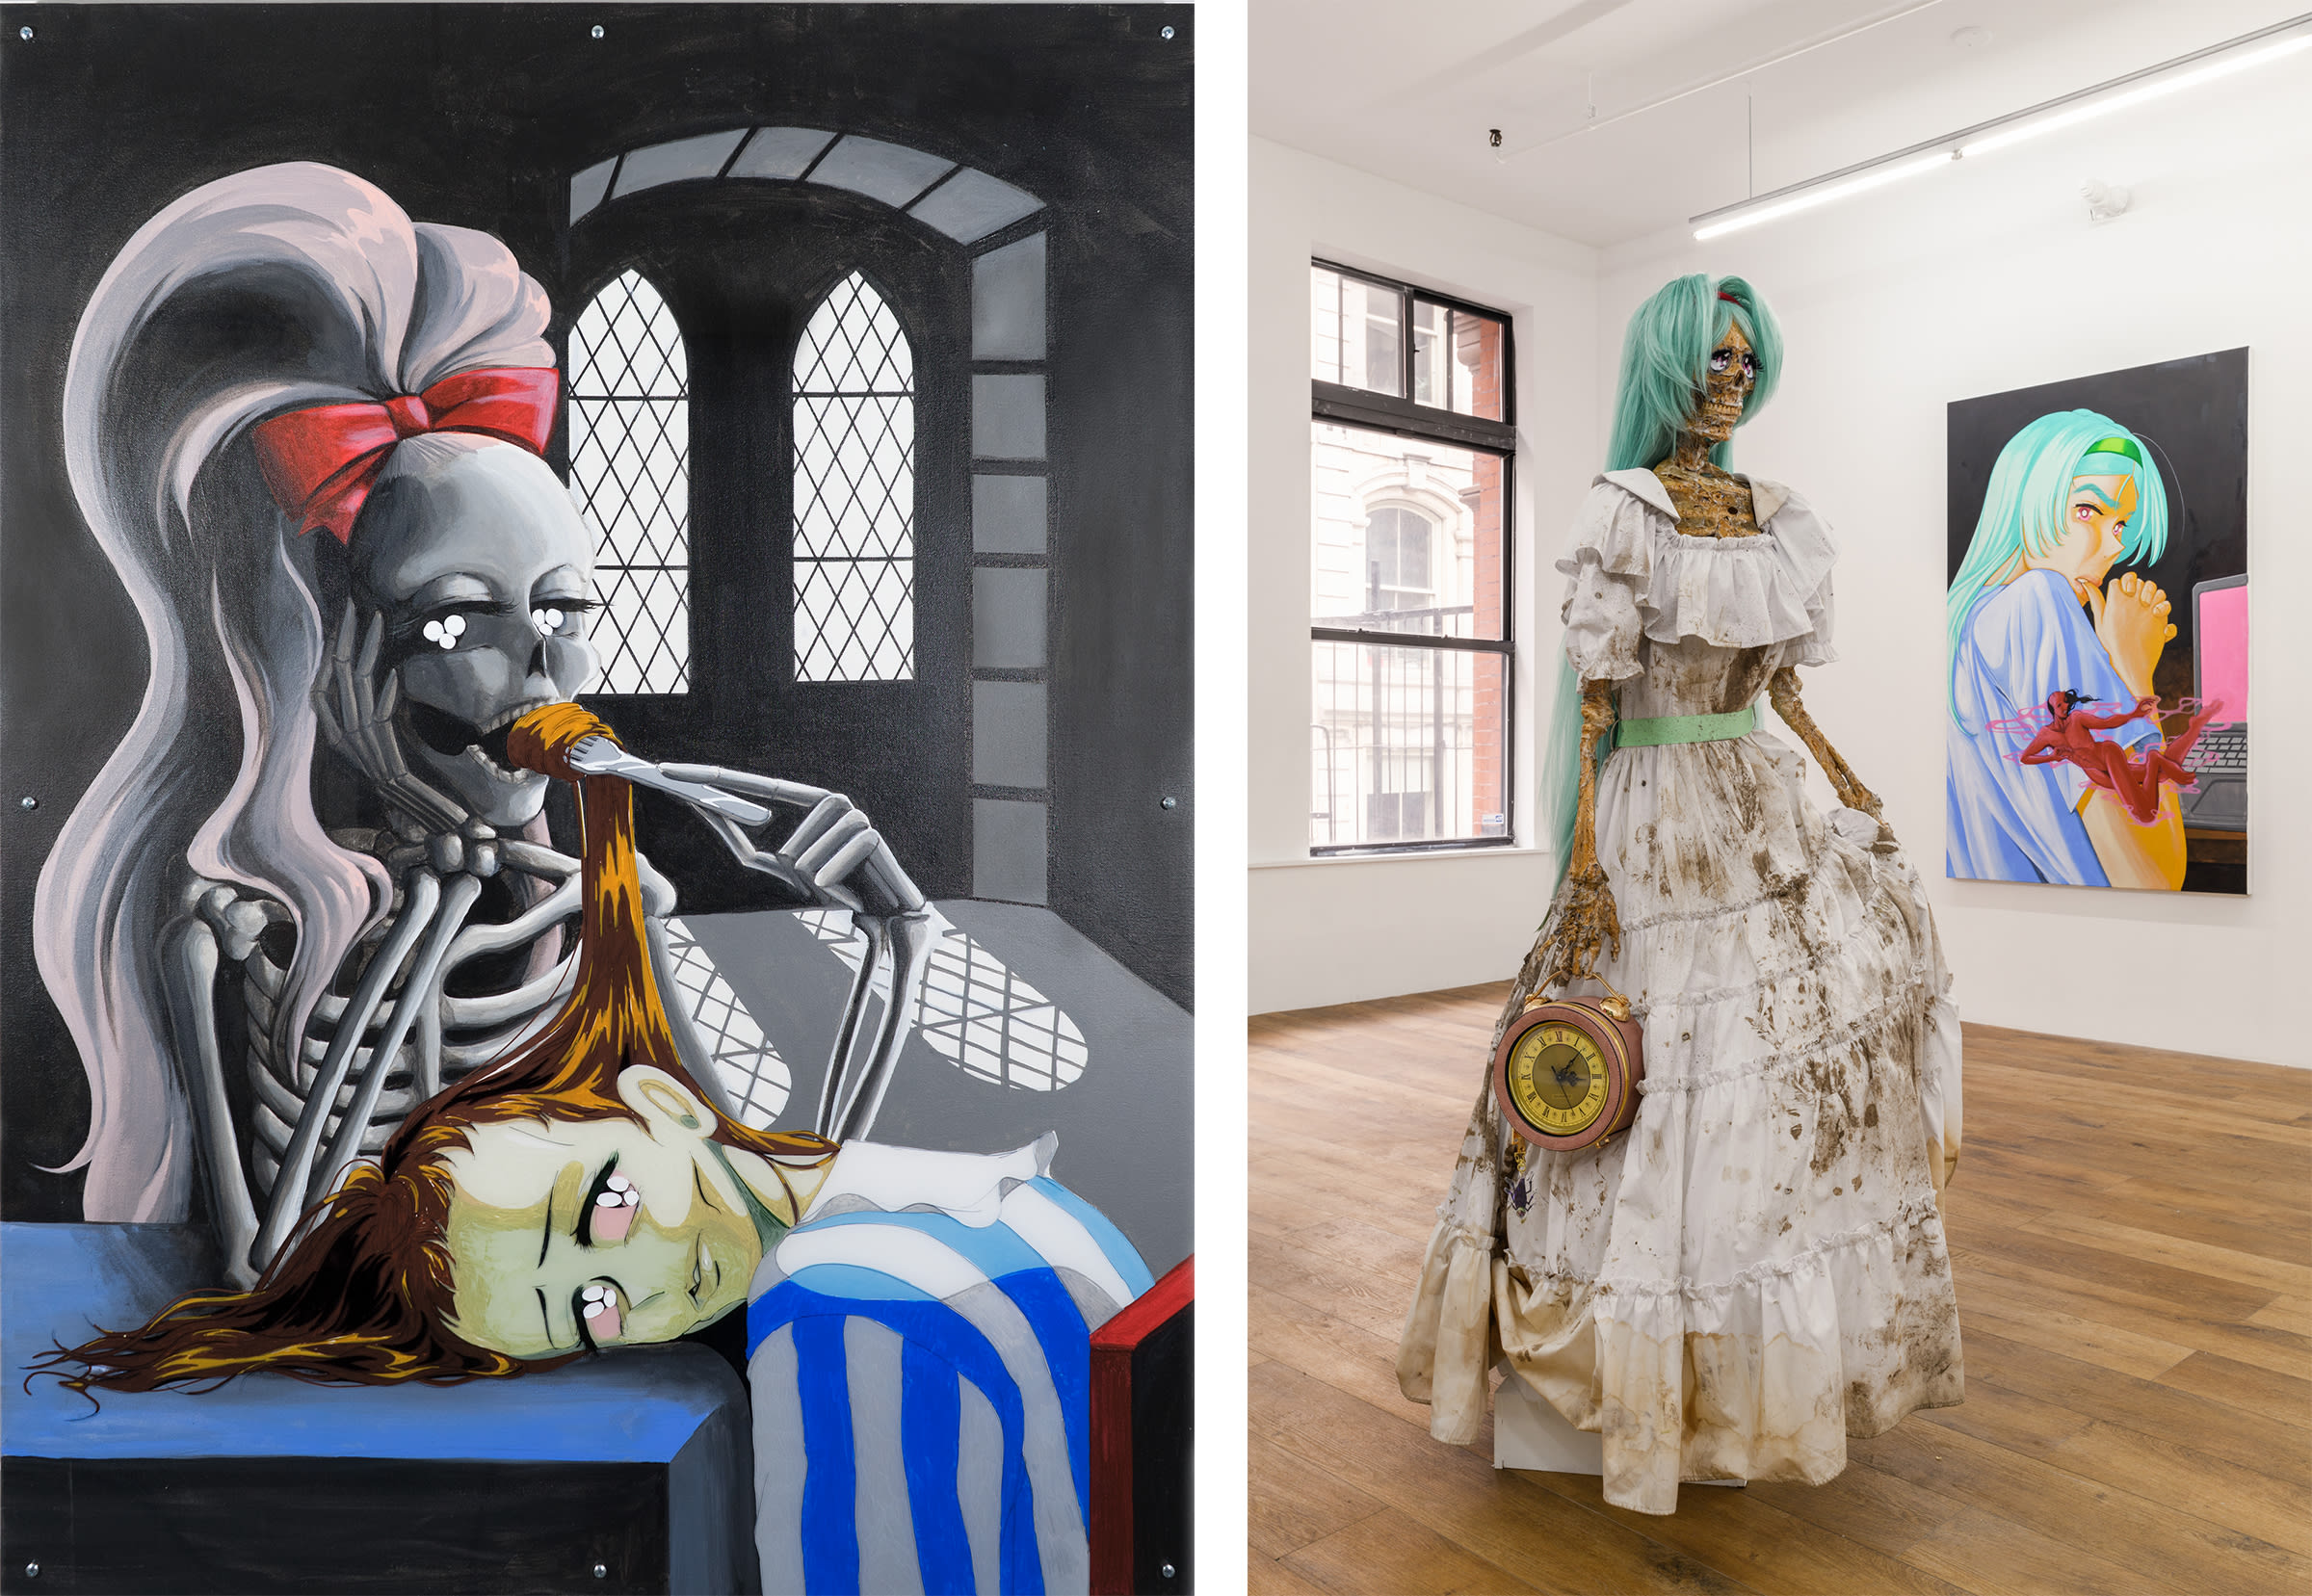 Left: Julien Ceccaldi, Teenager for Dinner, 2018. Photo by Mario Miron. Courtesy of the artist and Gaga. Right: Installation view of Julien Ceccaldi's exhibition 'Centuries Old', Lomex, New York City, October 2021. Courtesy of the artist and Lomex.